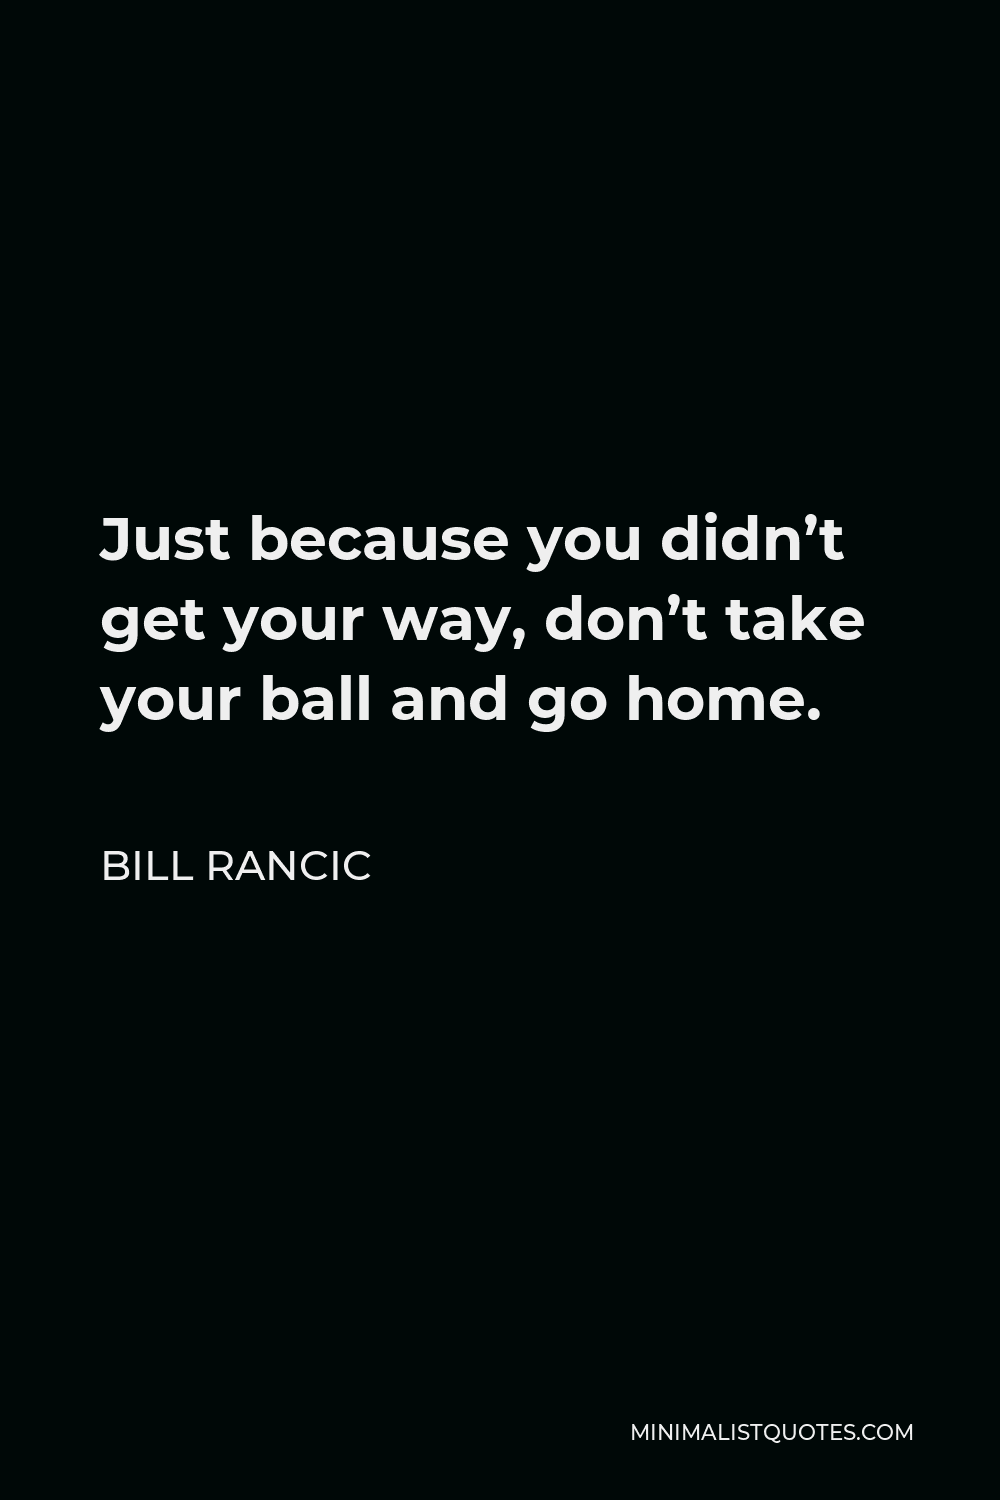 Bill Rancic Quote - Just because you didn’t get your way, don’t take your ball and go home.